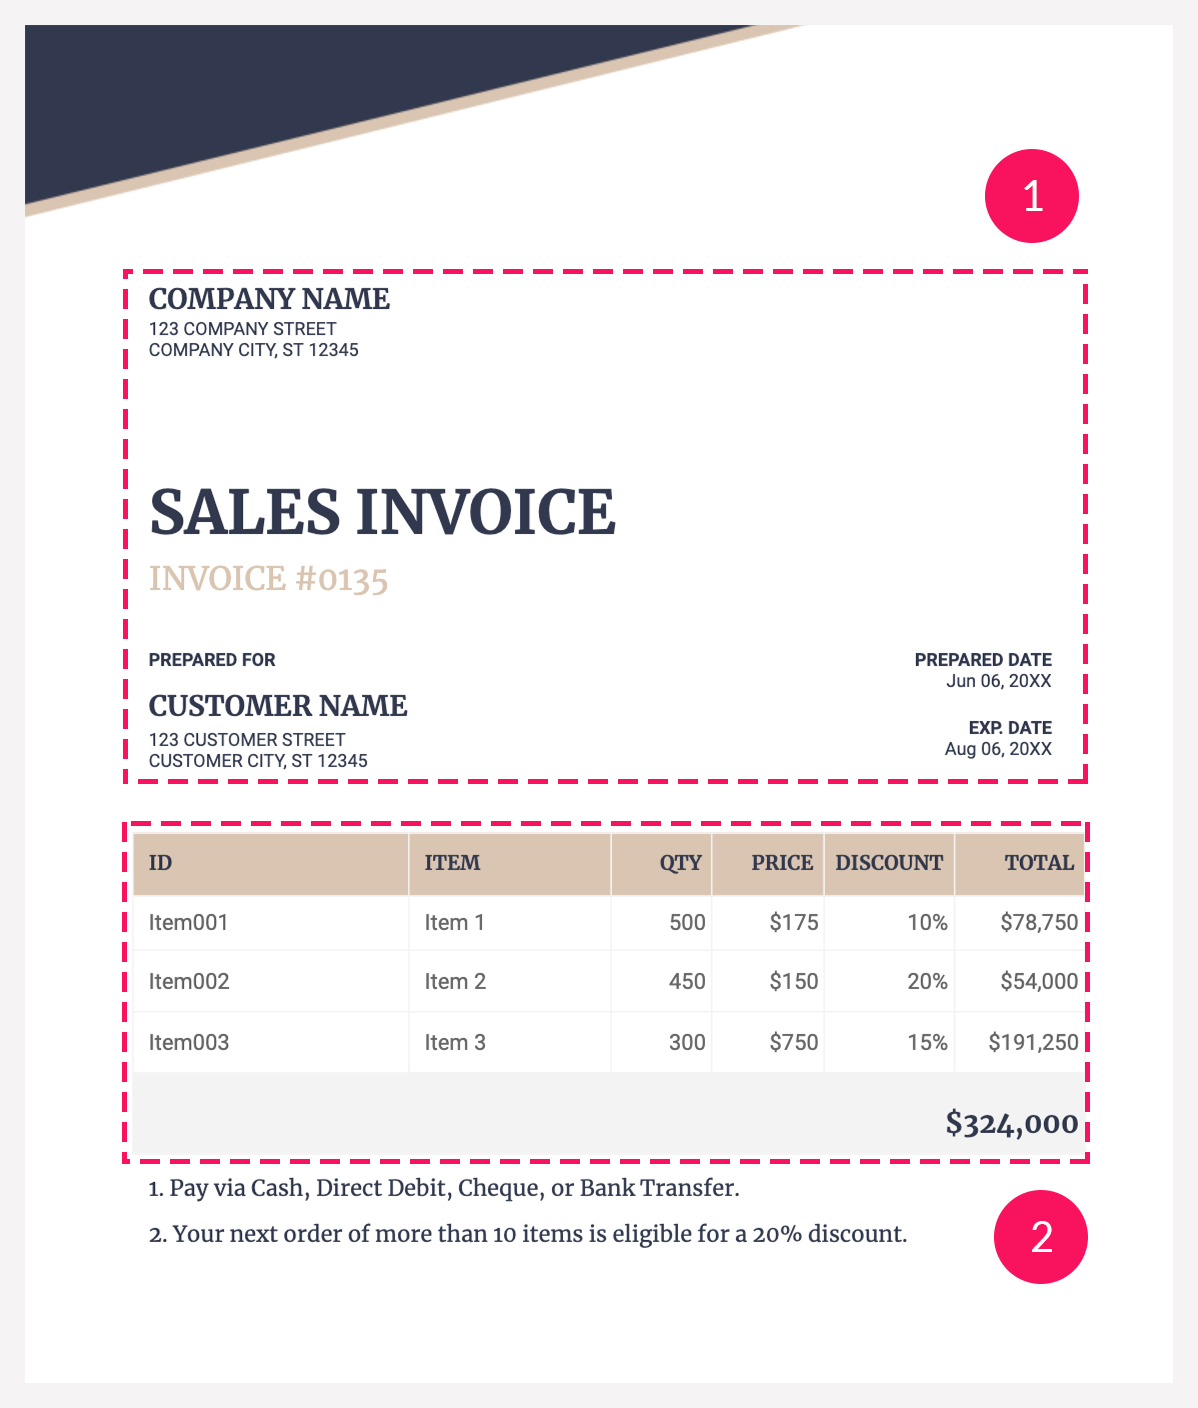 Invoice.png